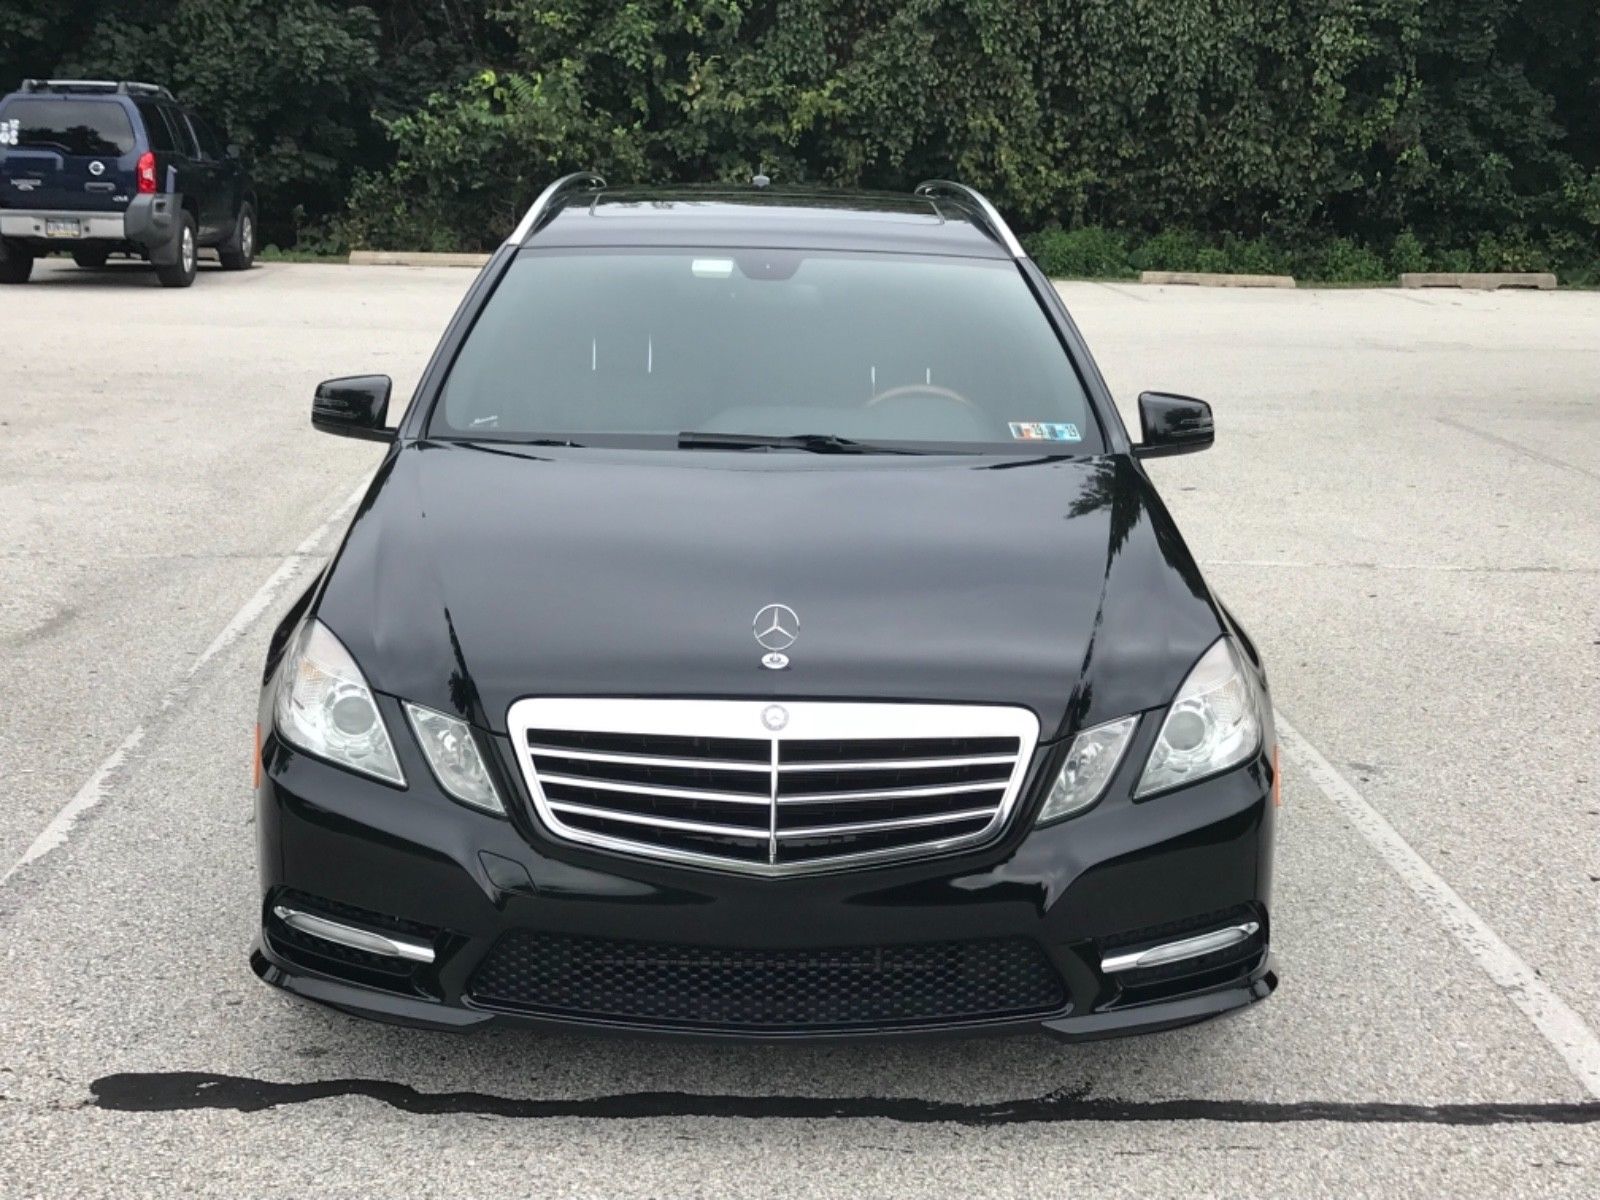 Used 2012 Mercedes Benz E Class 2012 Mercedes Benz E350 4matic Wagon 2018 2019 Is In Stock And For Sale 24carshop Com